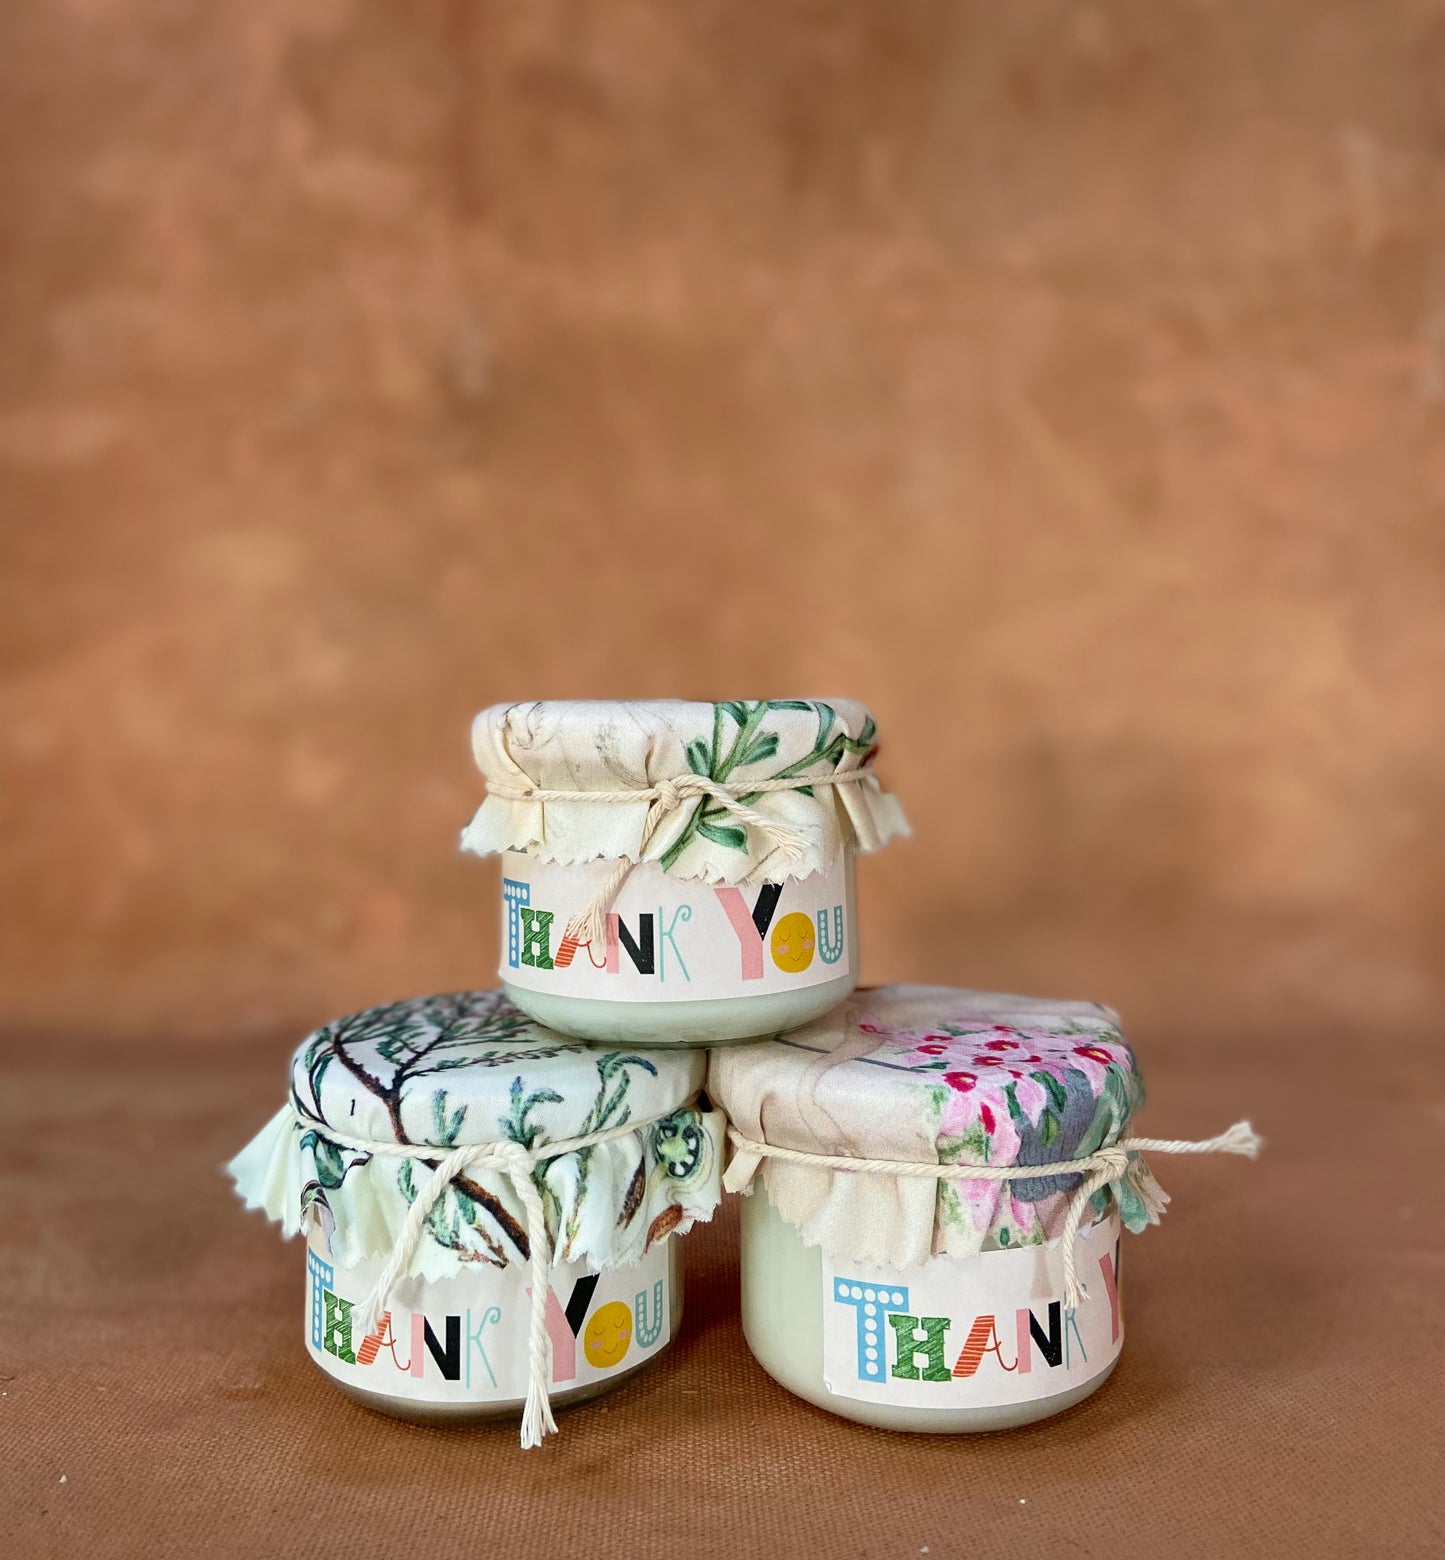 A stack of three candle pots with floral material lids, a label reading "Thank You" is stuck to each candle pot